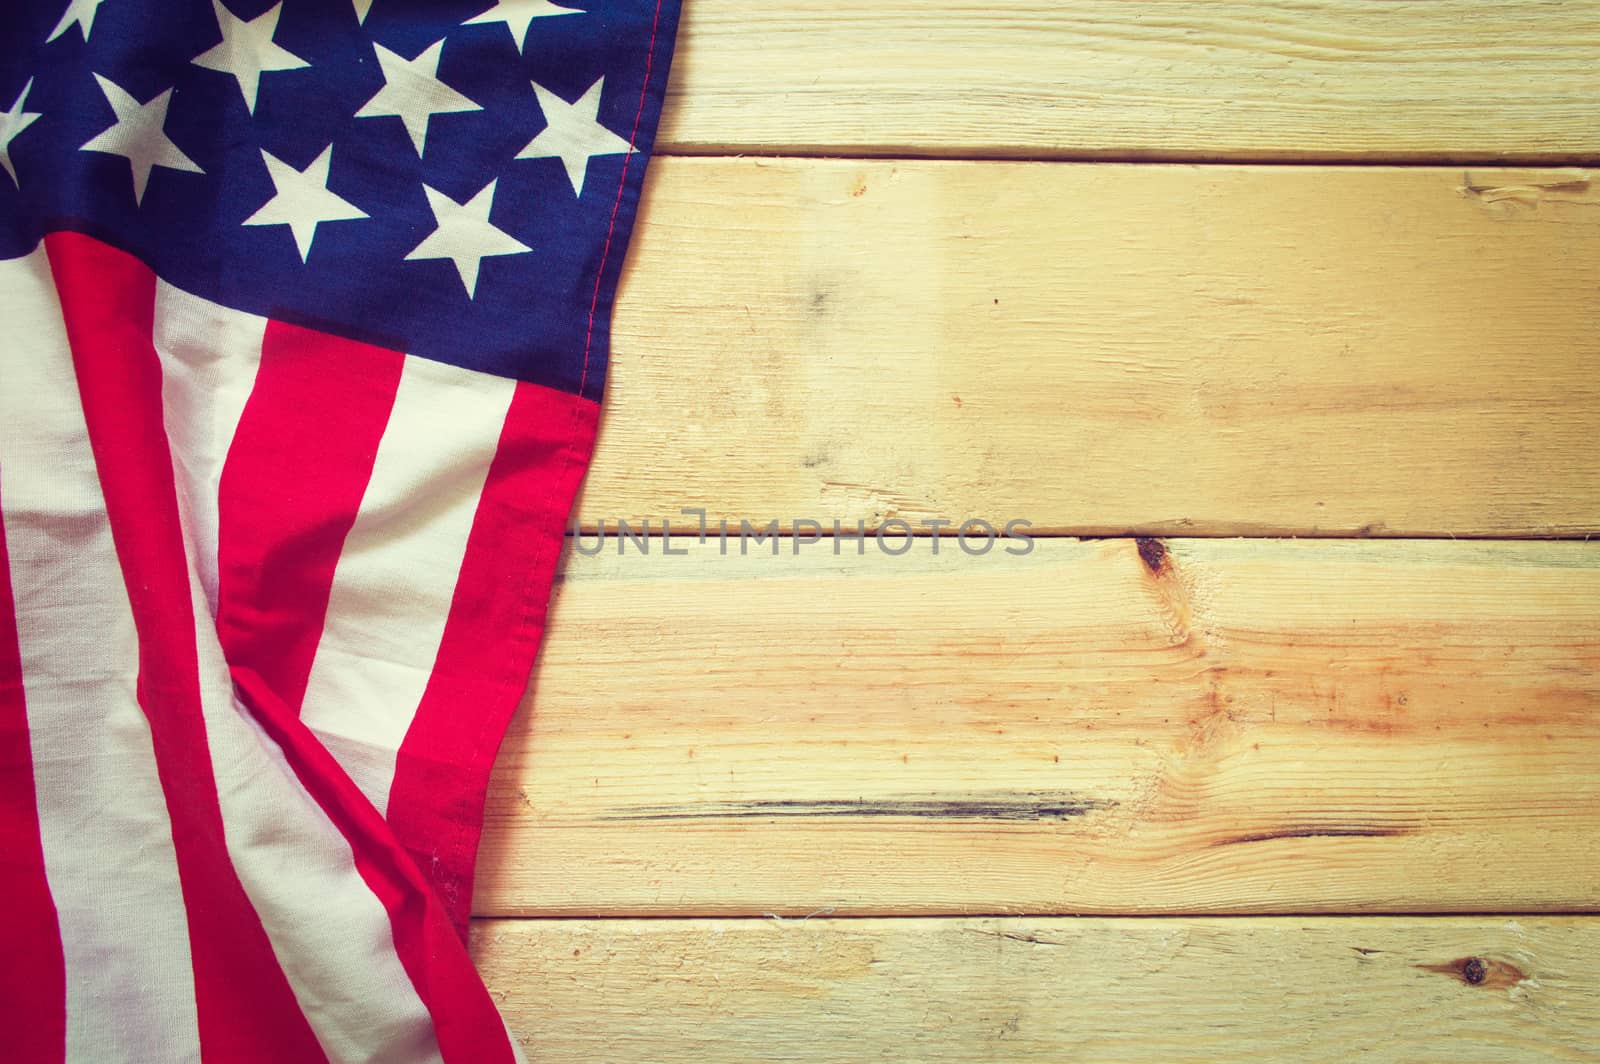  American flag on wooden background by Nu1983